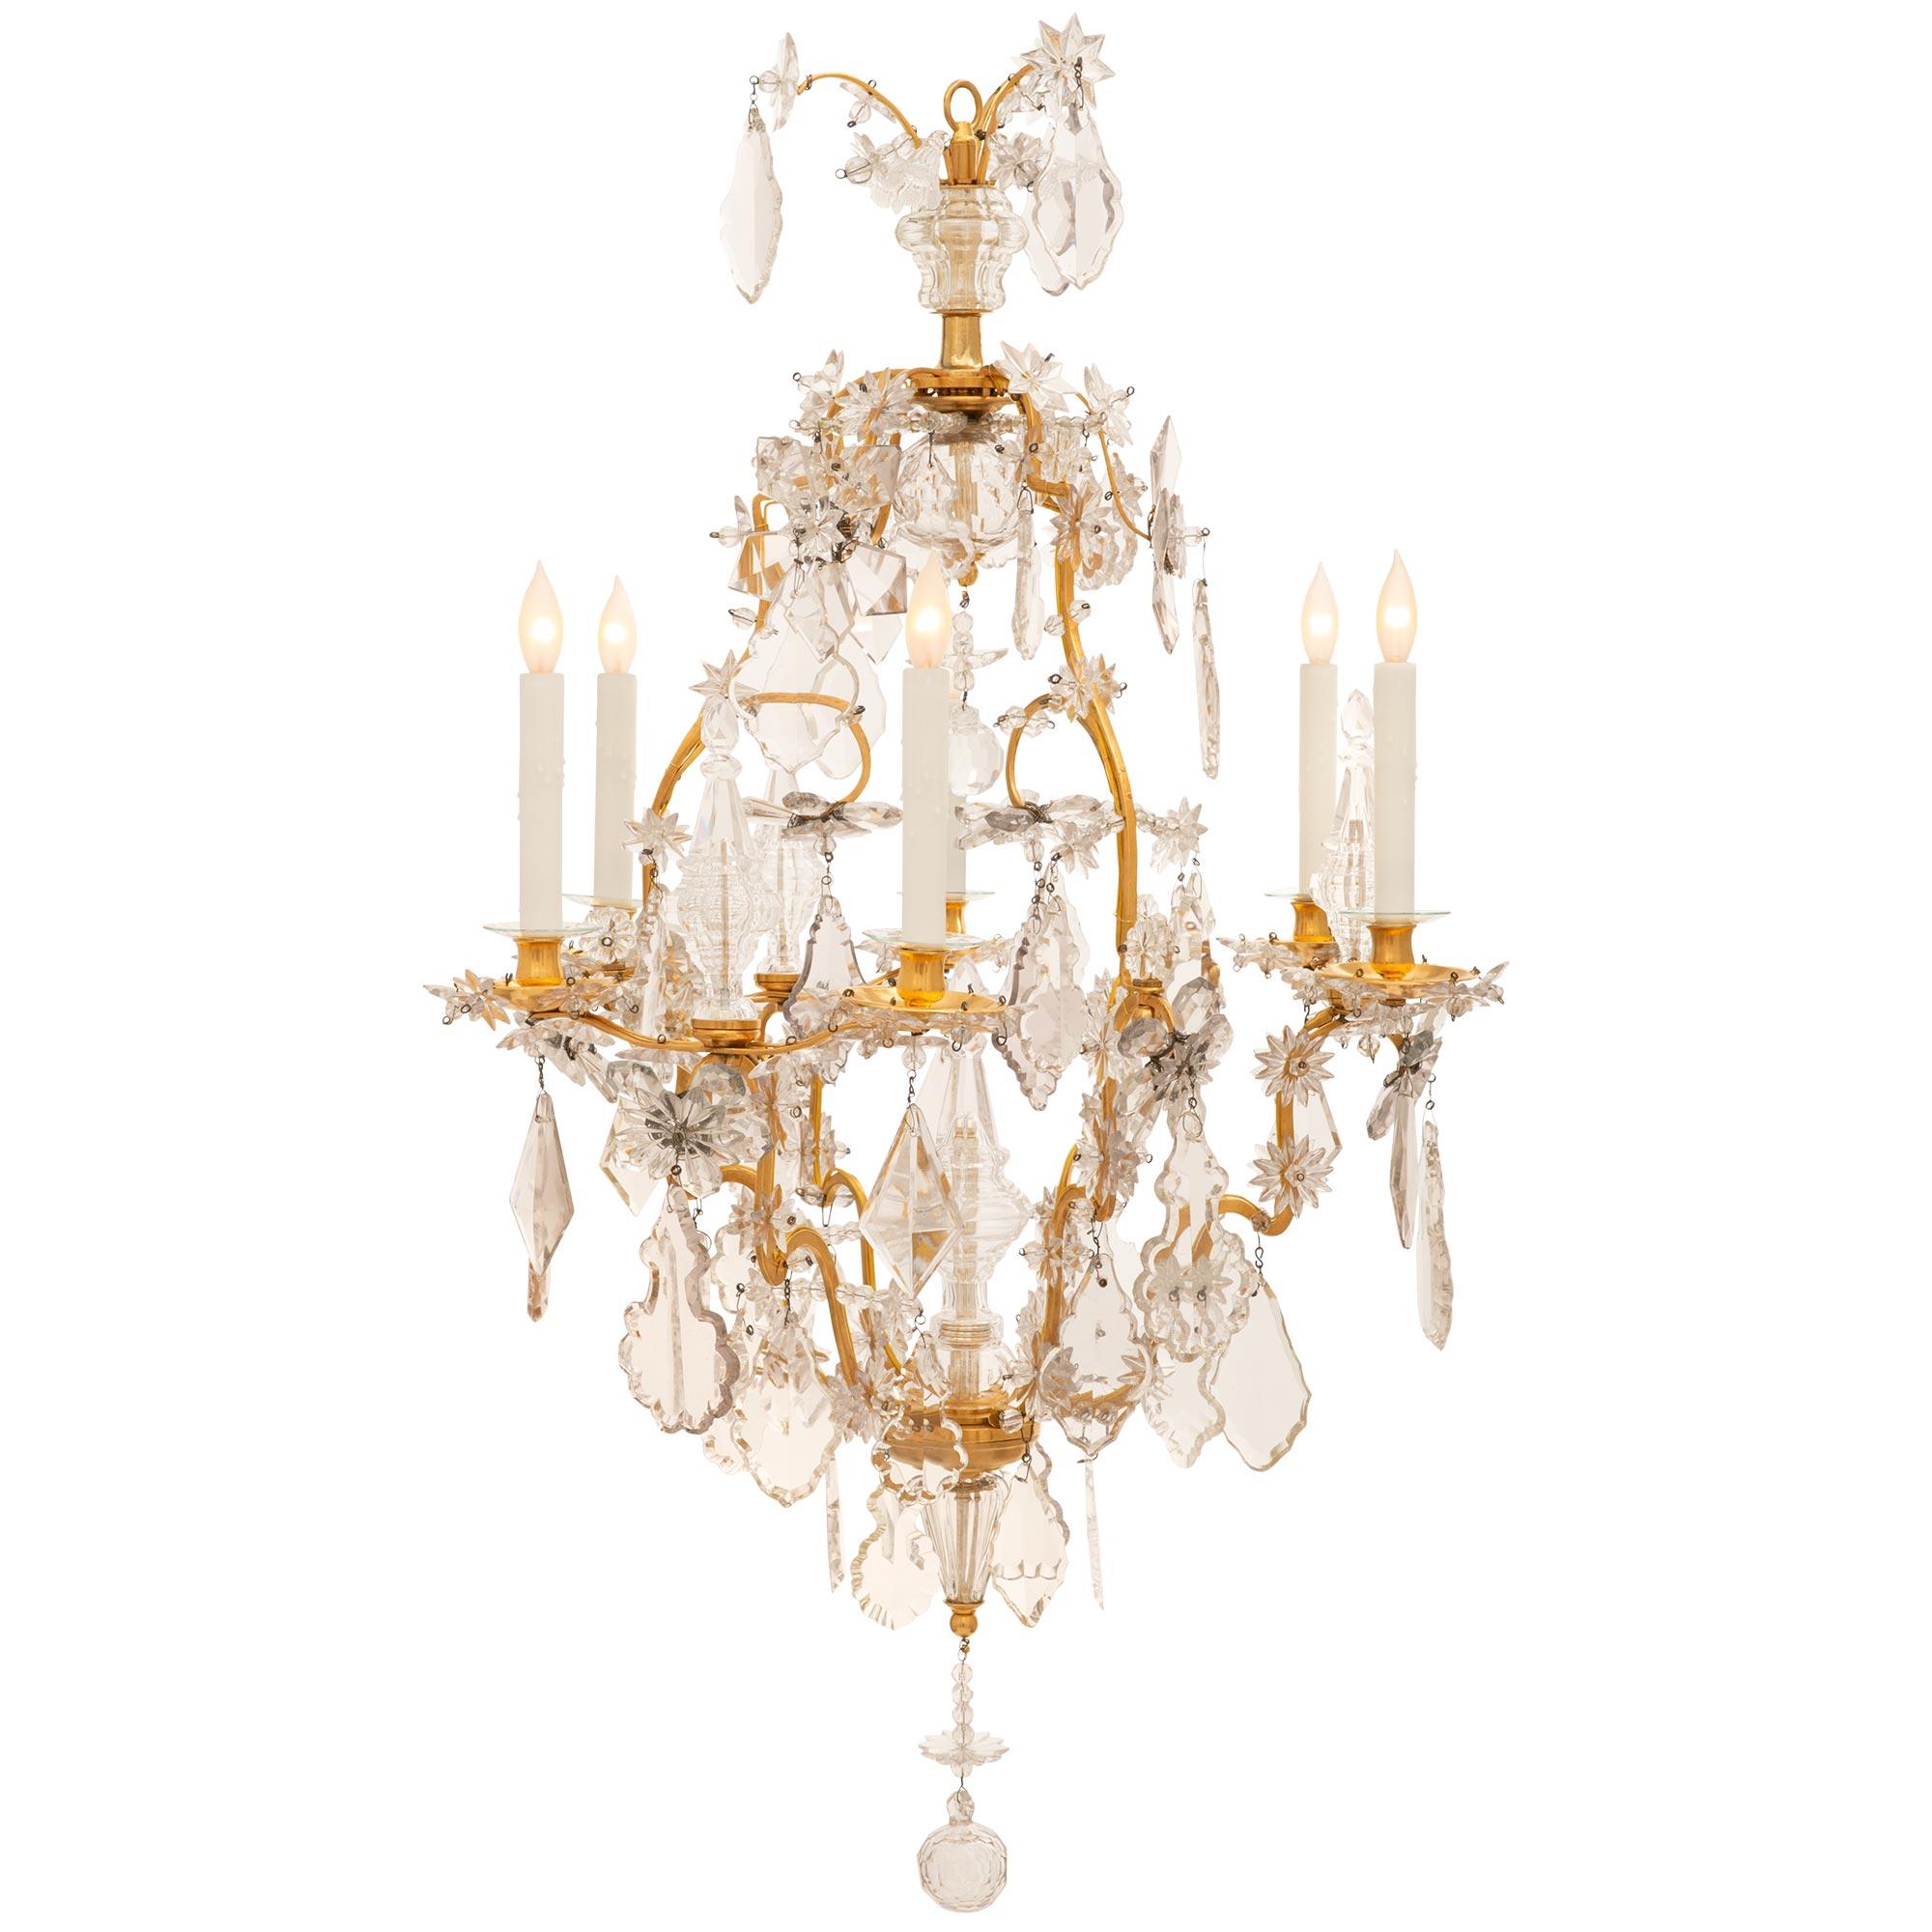 French 18th Century Louis XV St. Ormolu And Baccarat Crystal Chandelier In Good Condition For Sale In West Palm Beach, FL